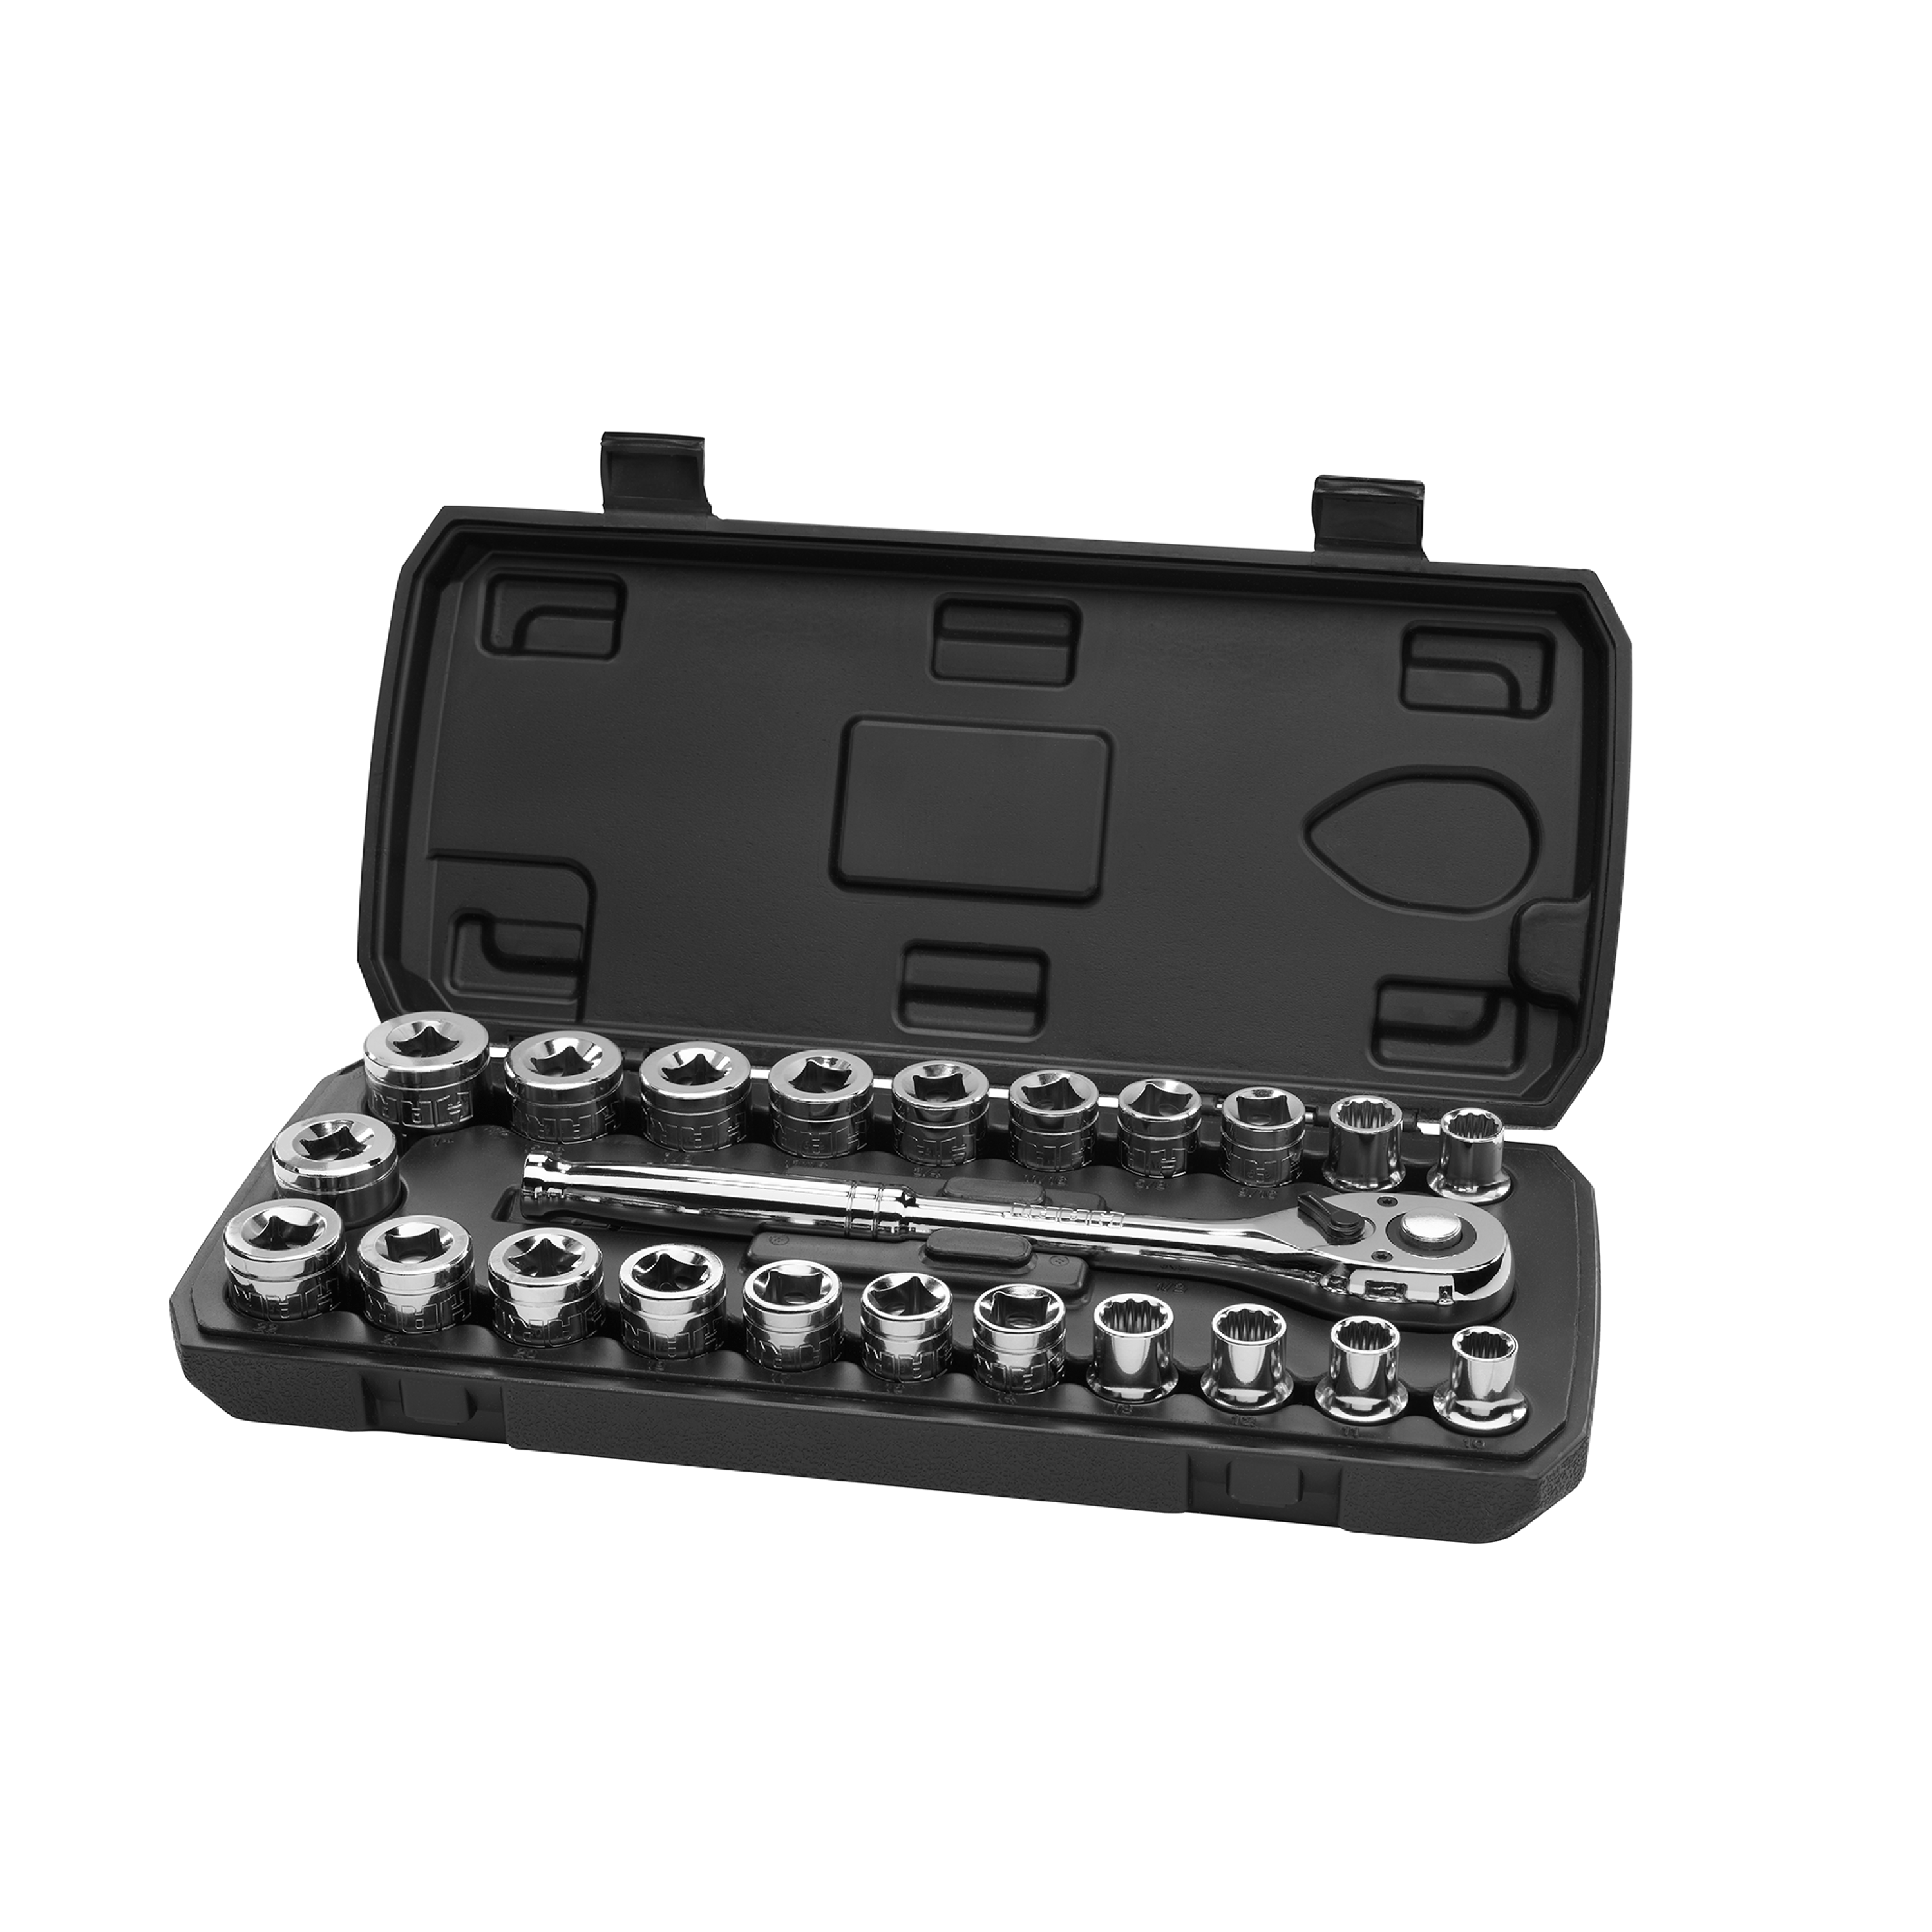 HART 23-Piece 1/2-Inch Drive Mechanics Set with Socket Wrench Ratchet and Sets, Chrome Finish - image 1 of 12